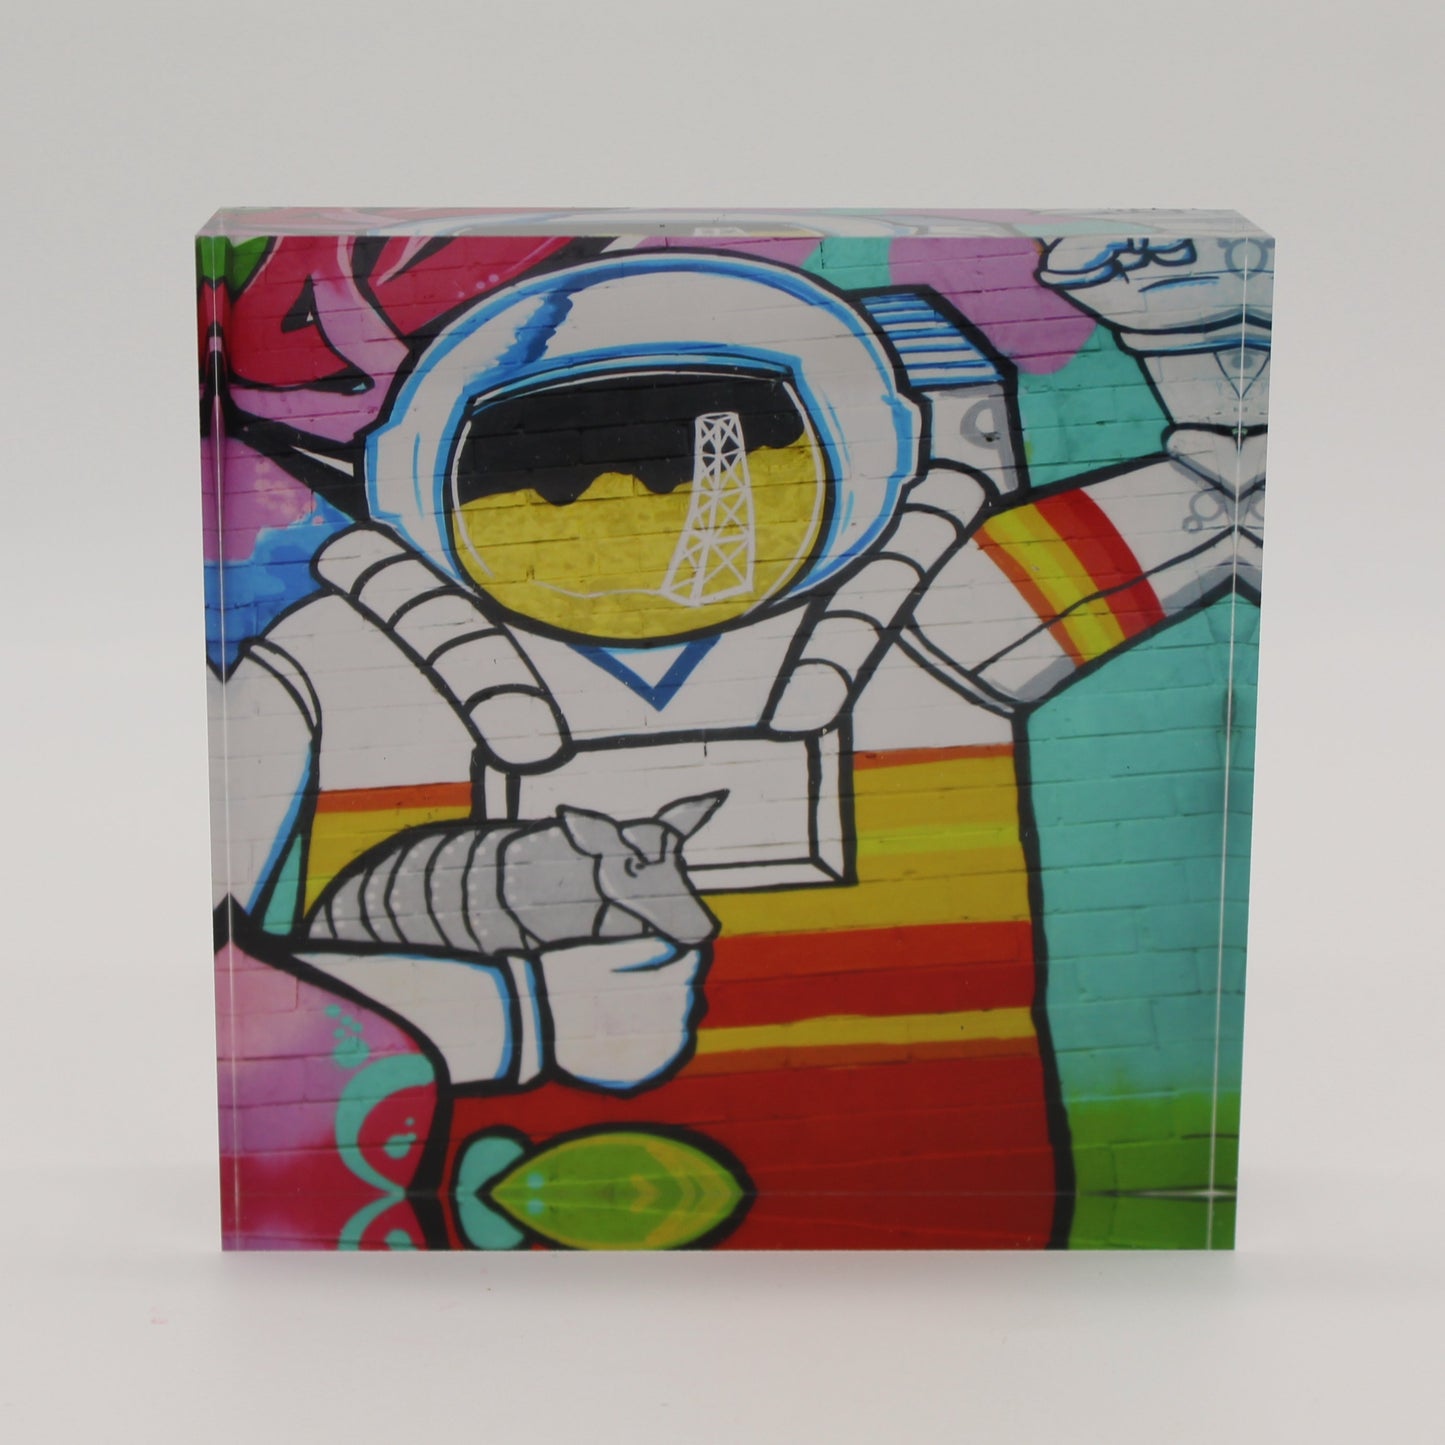 Acrylic block depicting astronaut holding an armadillo with an oil rig over face shield on the helmet